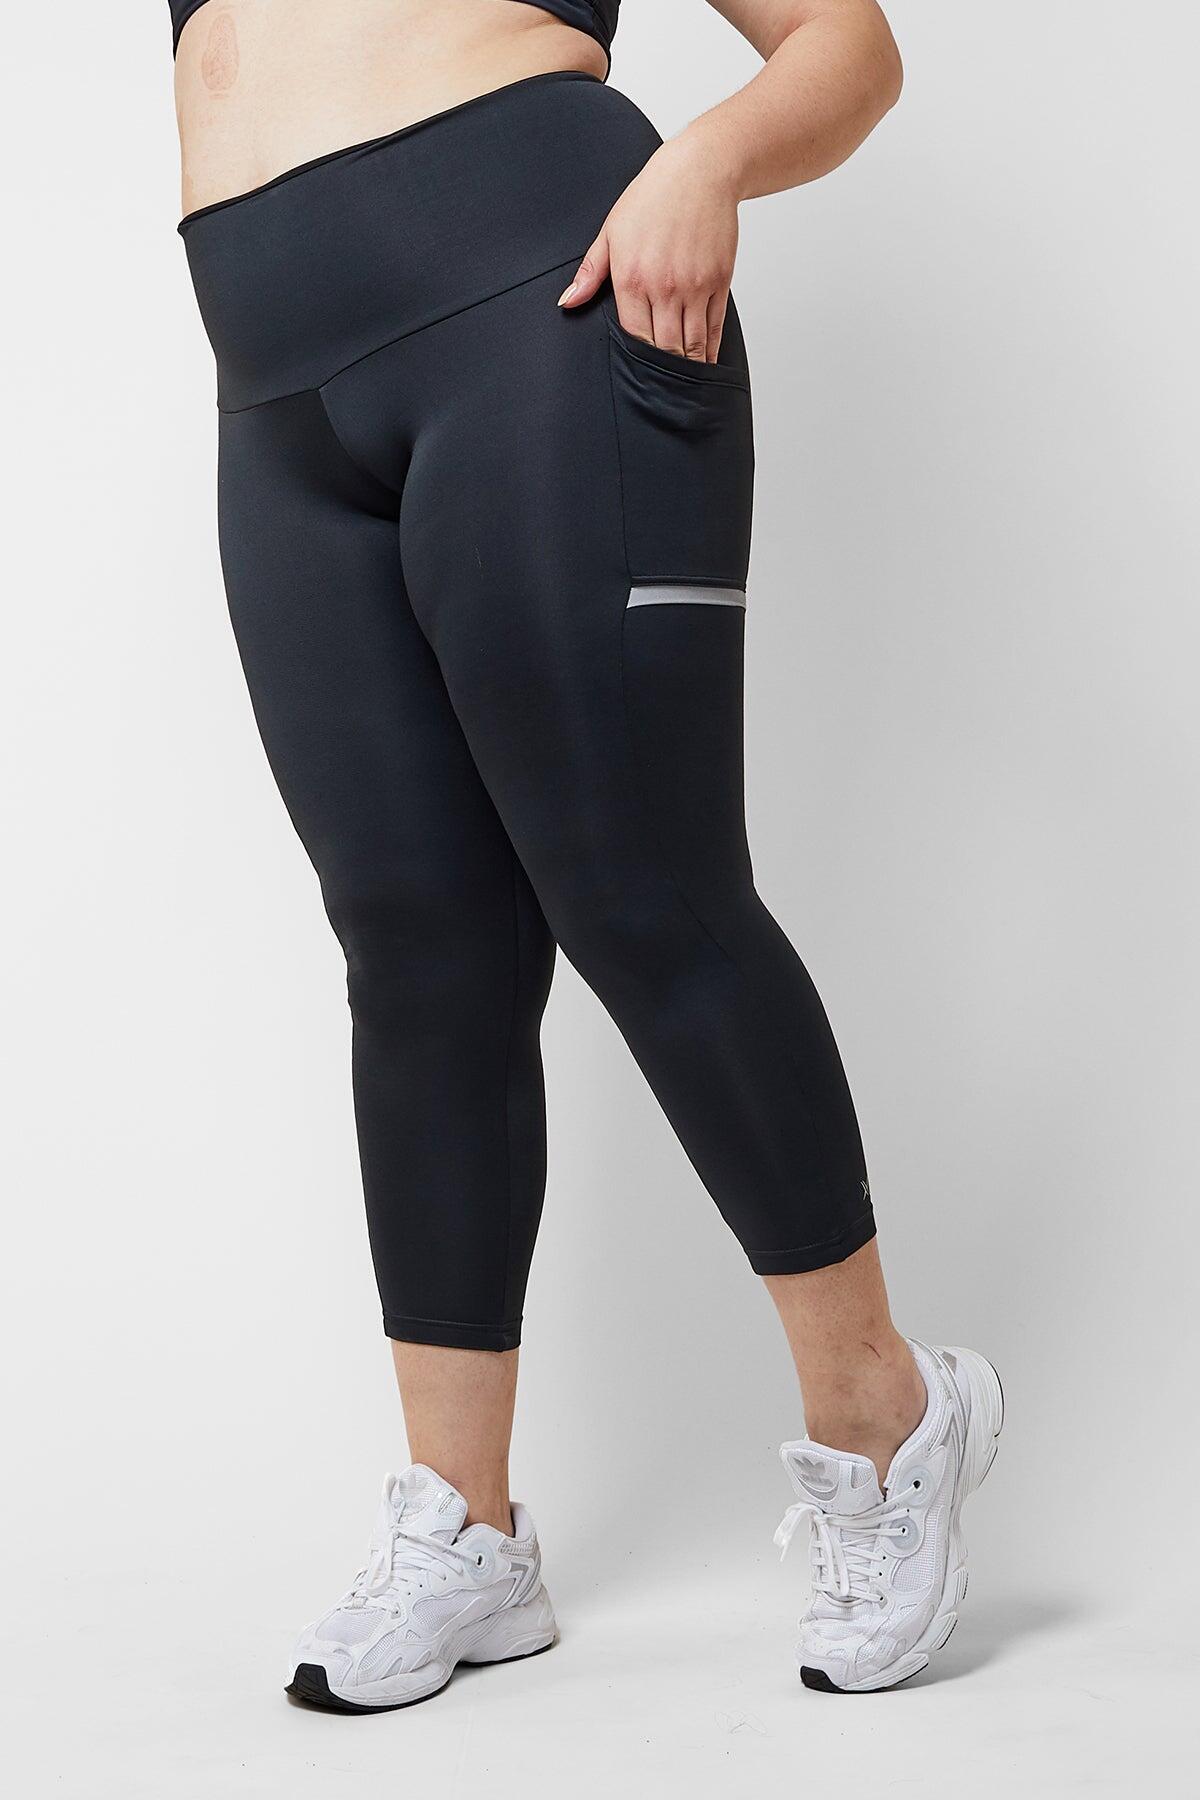 Reflective Side Pocket Leggings with Thermal Brushed Fabric Black 7/7